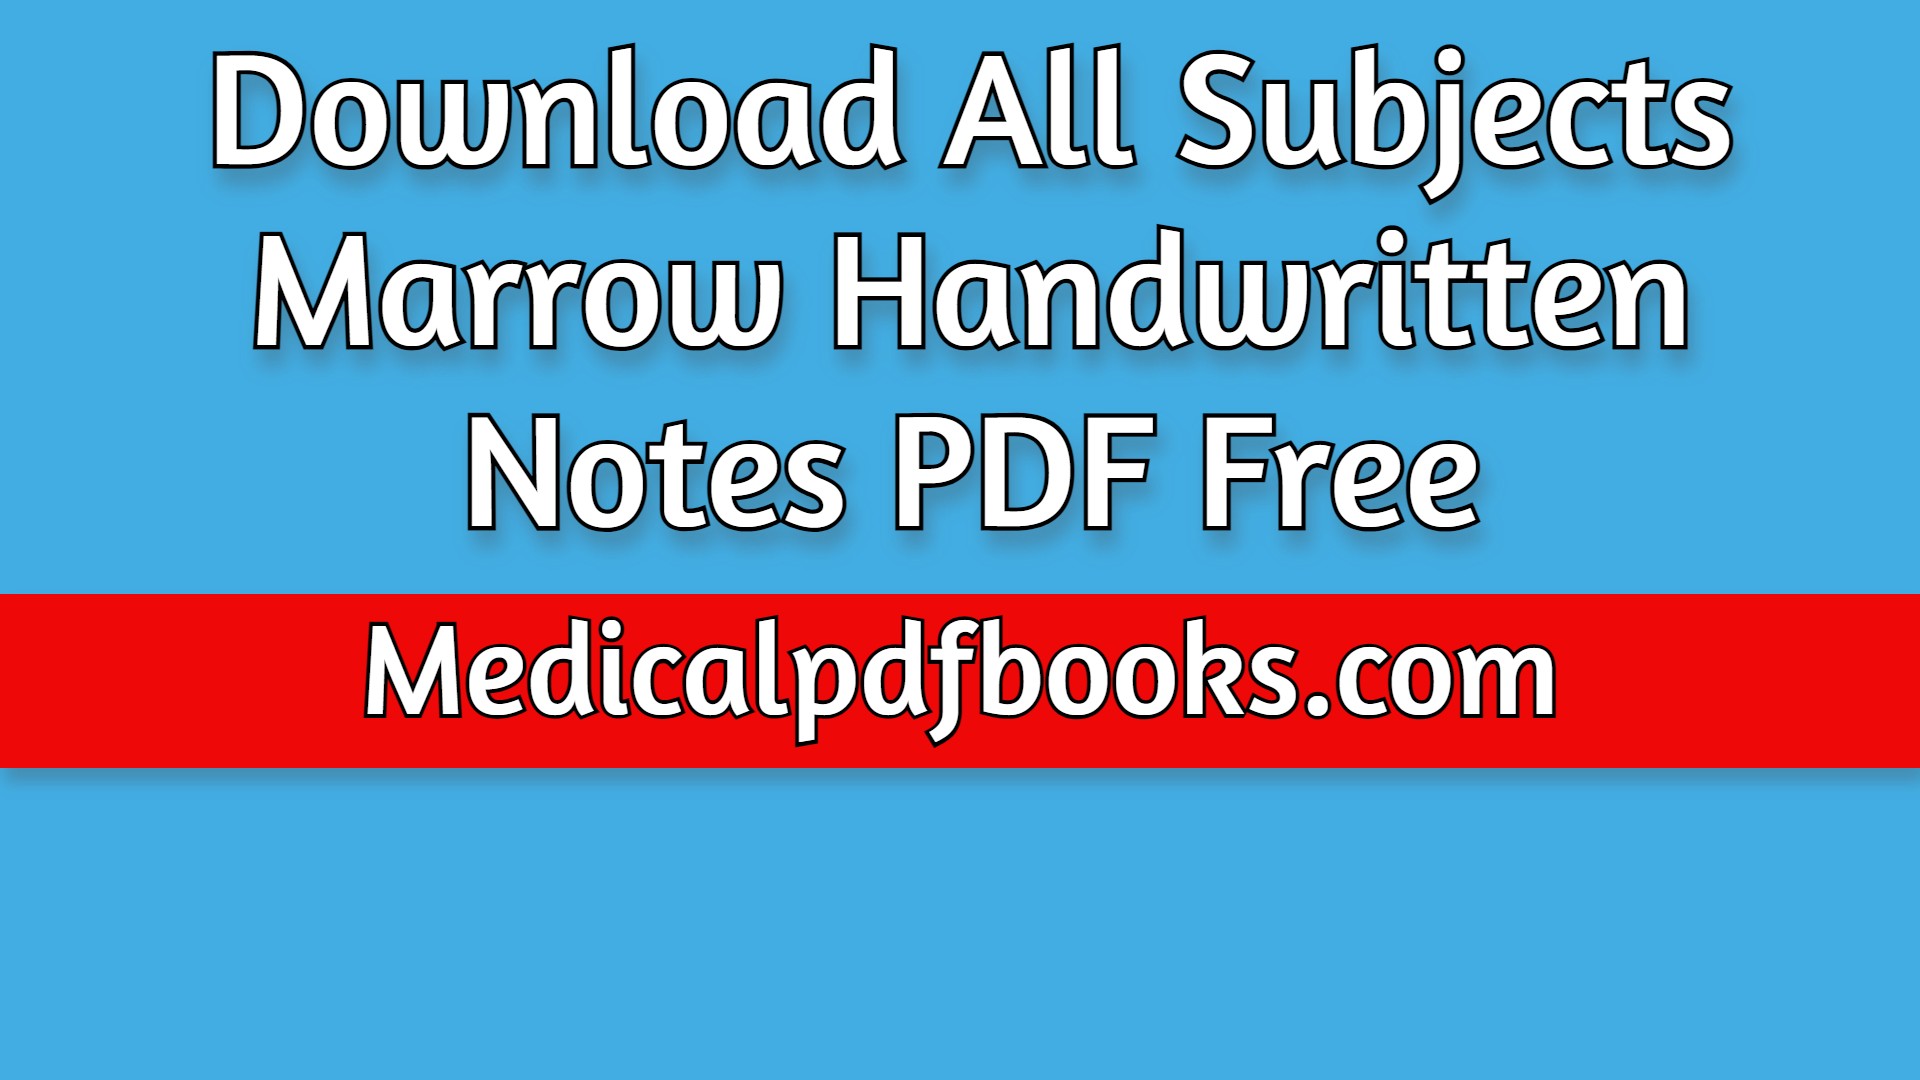 Download All Subjects Marrow Handwritten Notes 2021 PDF Free